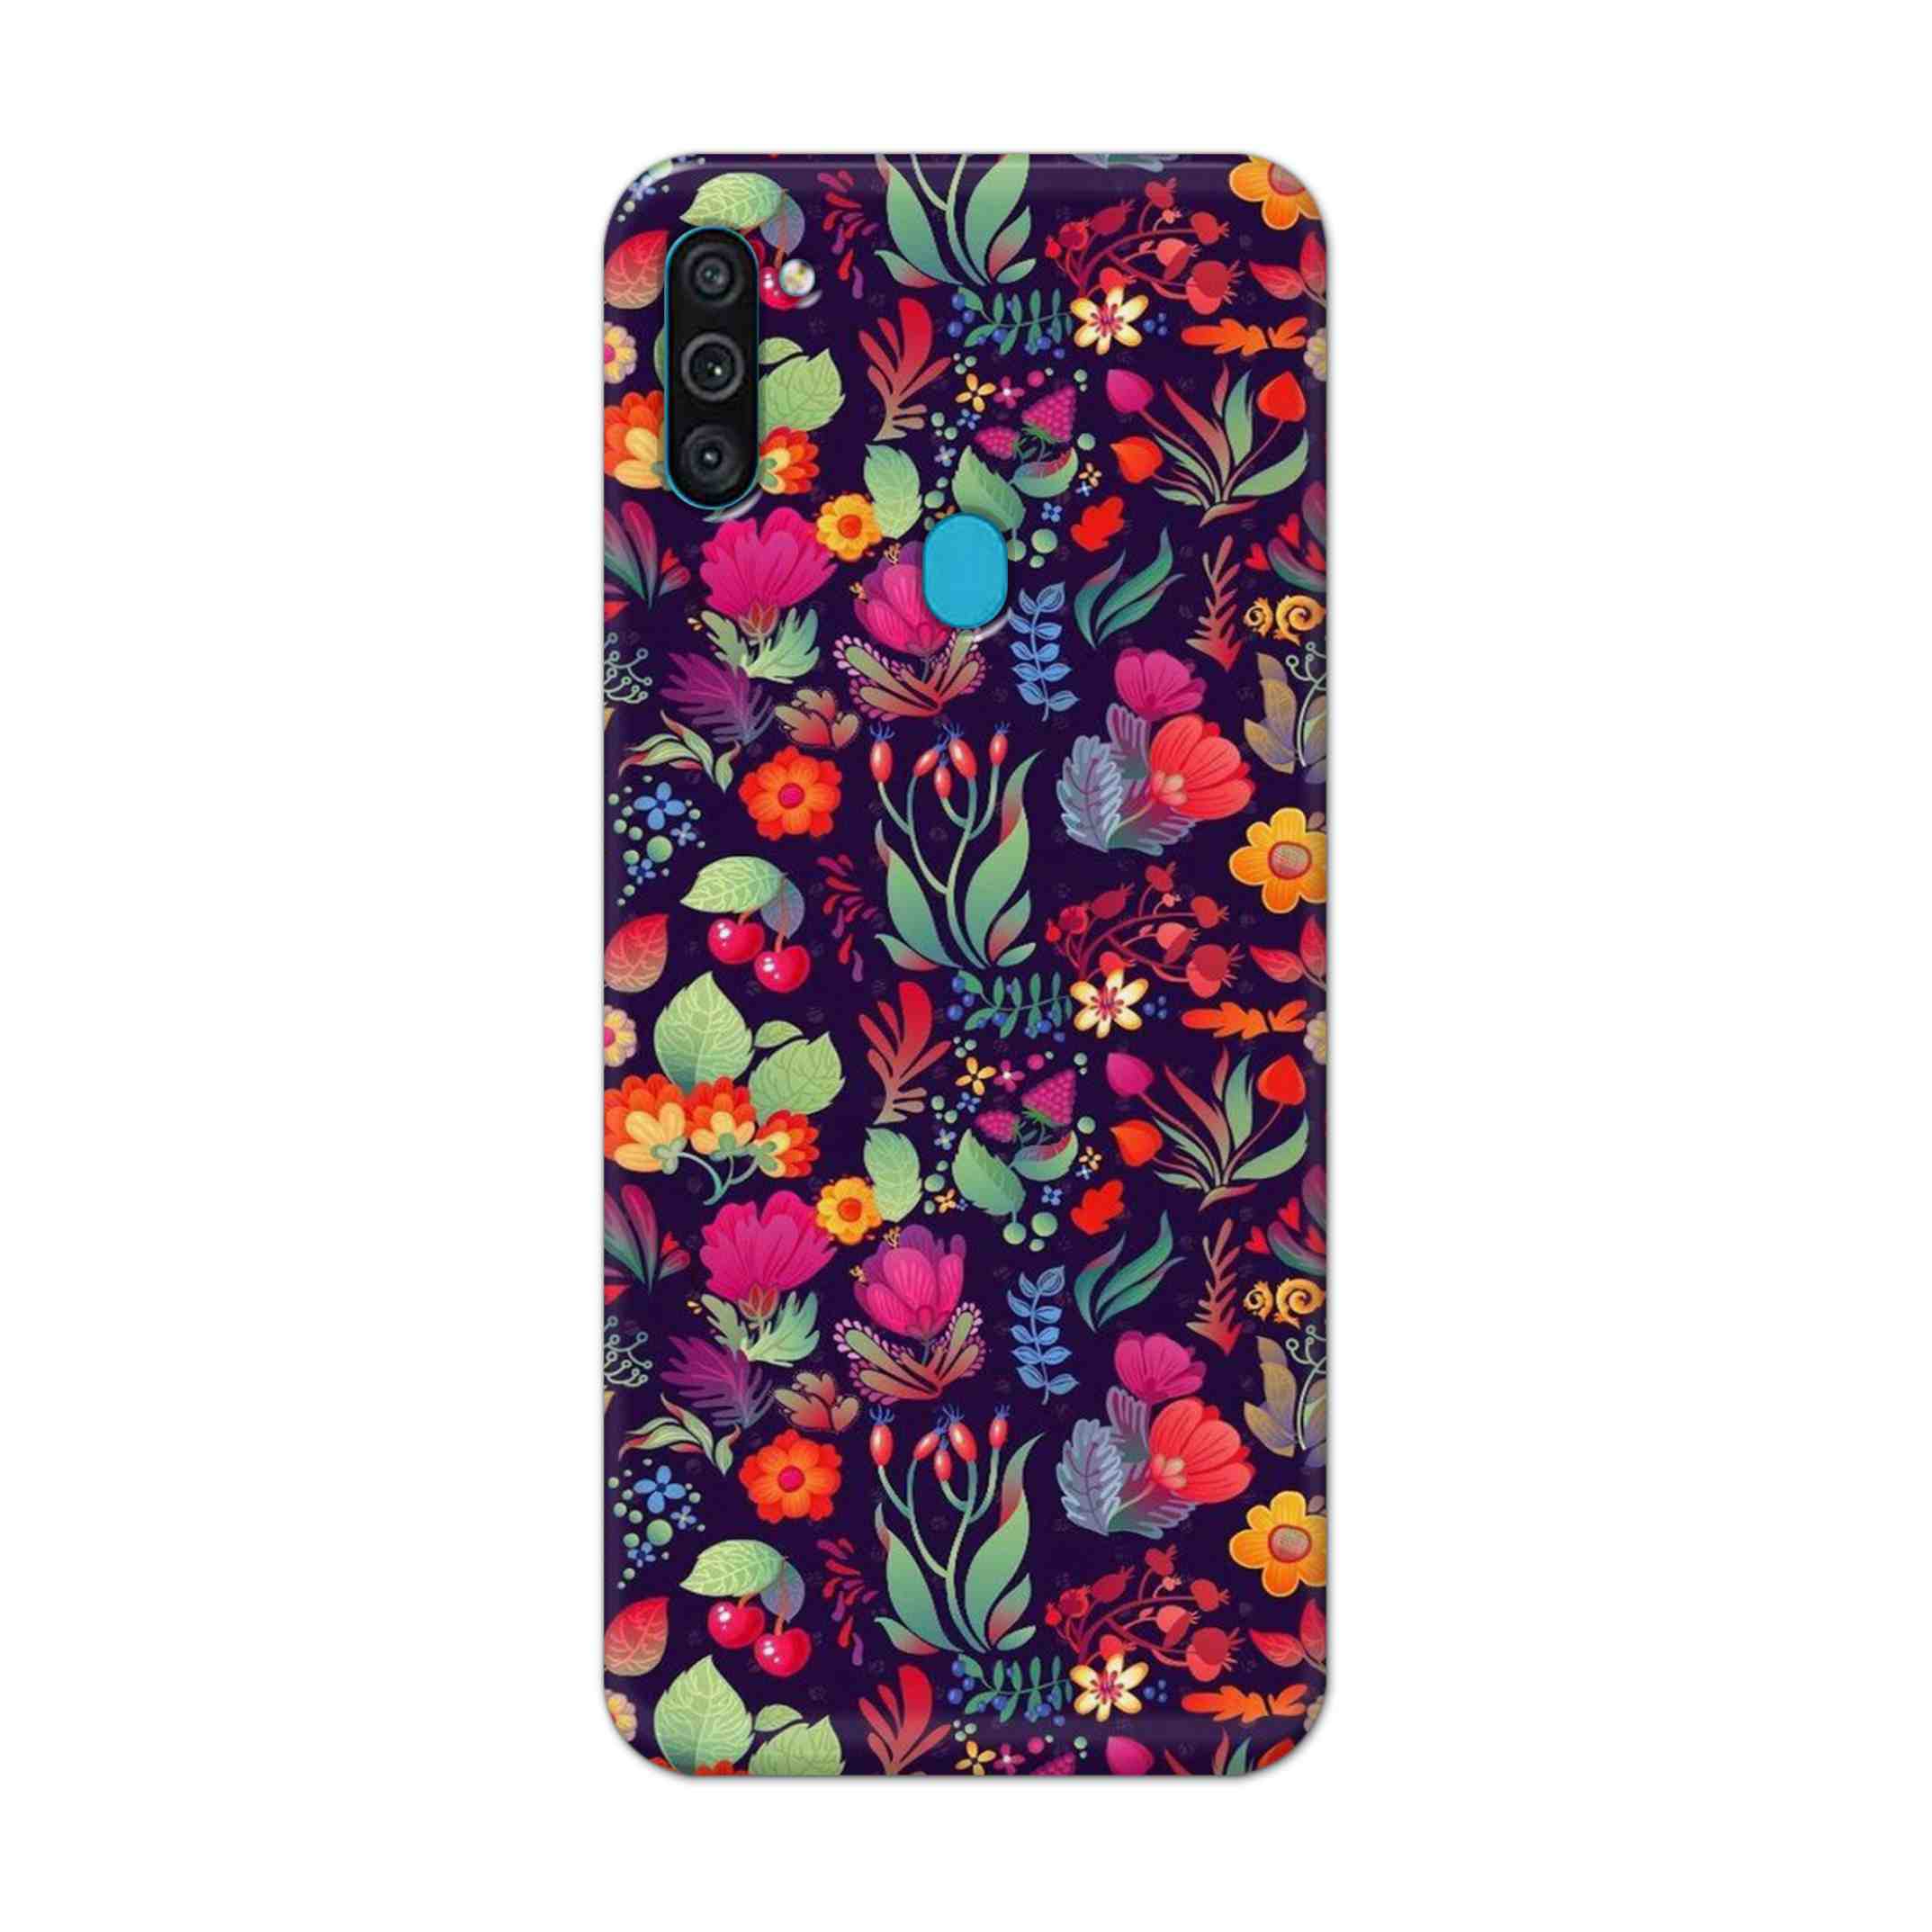 Buy Fruits Flower Hard Back Mobile Phone Case Cover For Samsung Galaxy M11 Online